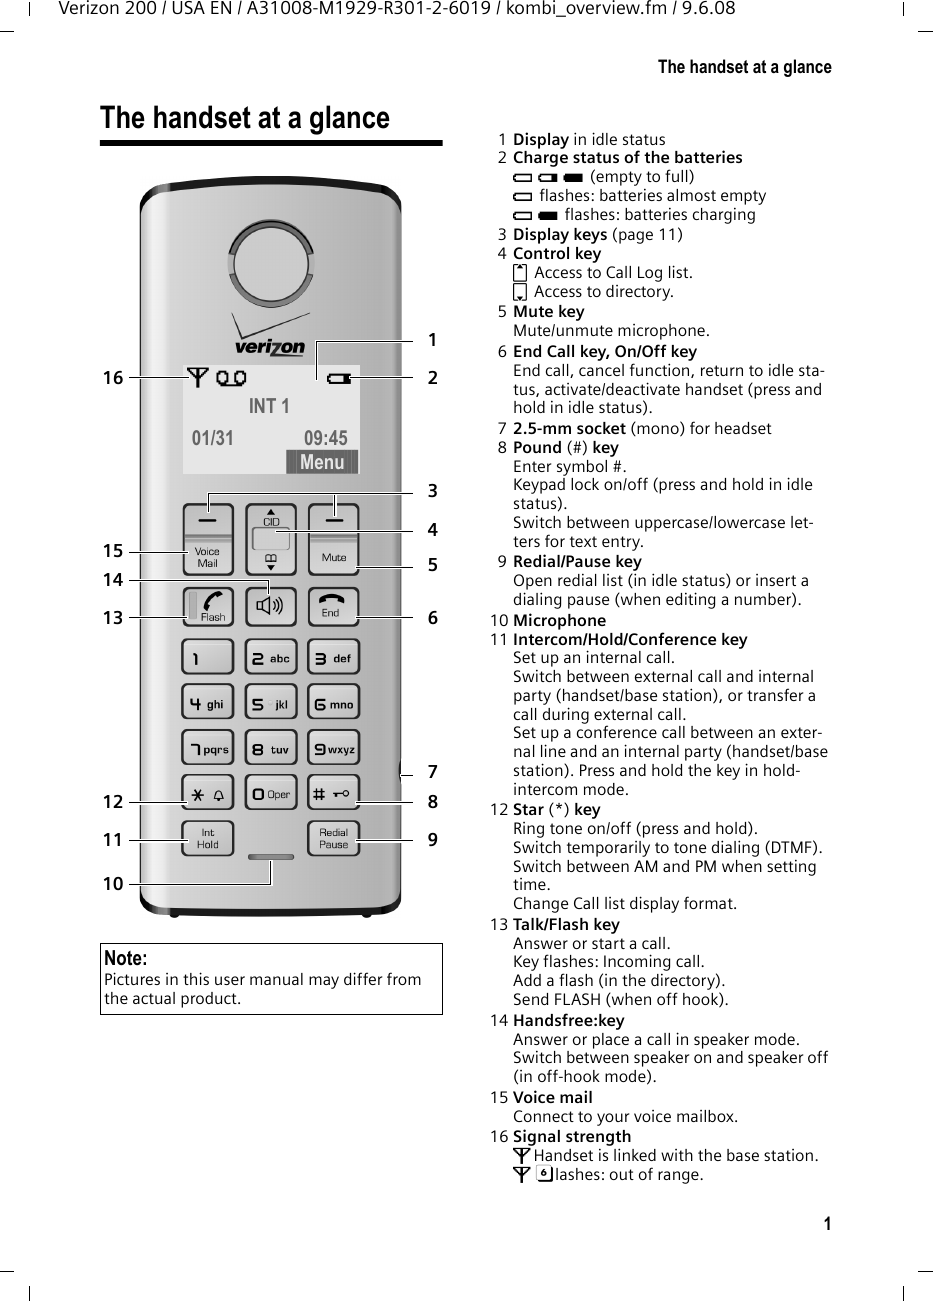 1The handset at a glanceVerizon 200 / USA EN / A31008-M1929-R301-2-6019 / kombi_overview.fm / 9.6.08The handset at a glance 1Display in idle status 2Charge status of the batteries = e U (empty to full) = flashes: batteries almost empty= U flashes: batteries charging3Display keys (page 11)4Control key t Access to Call Log list.s Access to directory.5Mute key Mute/unmute microphone.6End Call key, On/Off key End call, cancel function, return to idle sta-tus, activate/deactivate handset (press and hold in idle status).72.5-mm socket (mono) for headset8Pound (#) key Enter symbol #.Keypad lock on/off (press and hold in idle status).Switch between uppercase/lowercase let-ters for text entry.9Redial/Pause key Open redial list (in idle status) or insert a dialing pause (when editing a number).10 Microphone 11 Intercom/Hold/Conference keySet up an internal call.Switch between external call and internal party (handset/base station), or transfer a call during external call.Set up a conference call between an exter-nal line and an internal party (handset/base station). Press and hold the key in hold-intercom mode.12 Star (*) key Ring tone on/off (press and hold).Switch temporarily to tone dialing (DTMF).Switch between AM and PM when setting time. Change Call list display format.13 Talk/Flash key Answer or start a call.Key flashes: Incoming call.Add a flash (in the directory).Send FLASH (when off hook).14 Handsfree:key Answer or place a call in speaker mode.Switch between speaker on and speaker off (in off-hook mode).15 Voice mailConnect to your voice mailbox.16 Signal strength ÄHandset is linked with the base station.ÄFlashes: out of range.Note:Pictures in this user manual may differ from the actual product.ÄÕ e INT 1 01/31 09:45 123456789111314151610§§§§Menu§§§§12